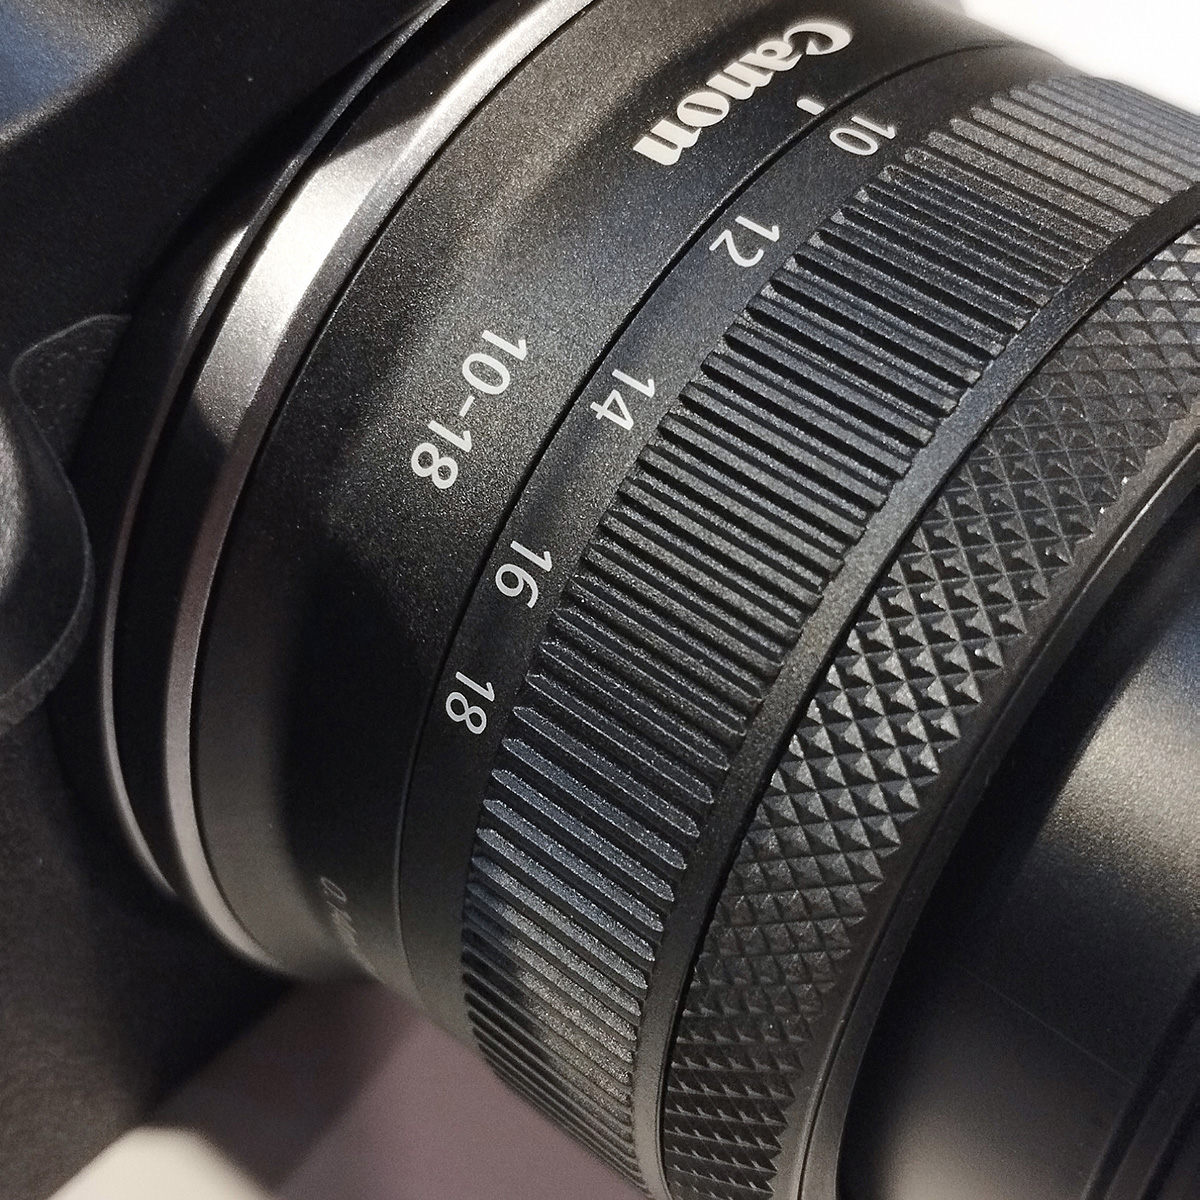 RF-S10-18mm F4.5-6.3 IS STM